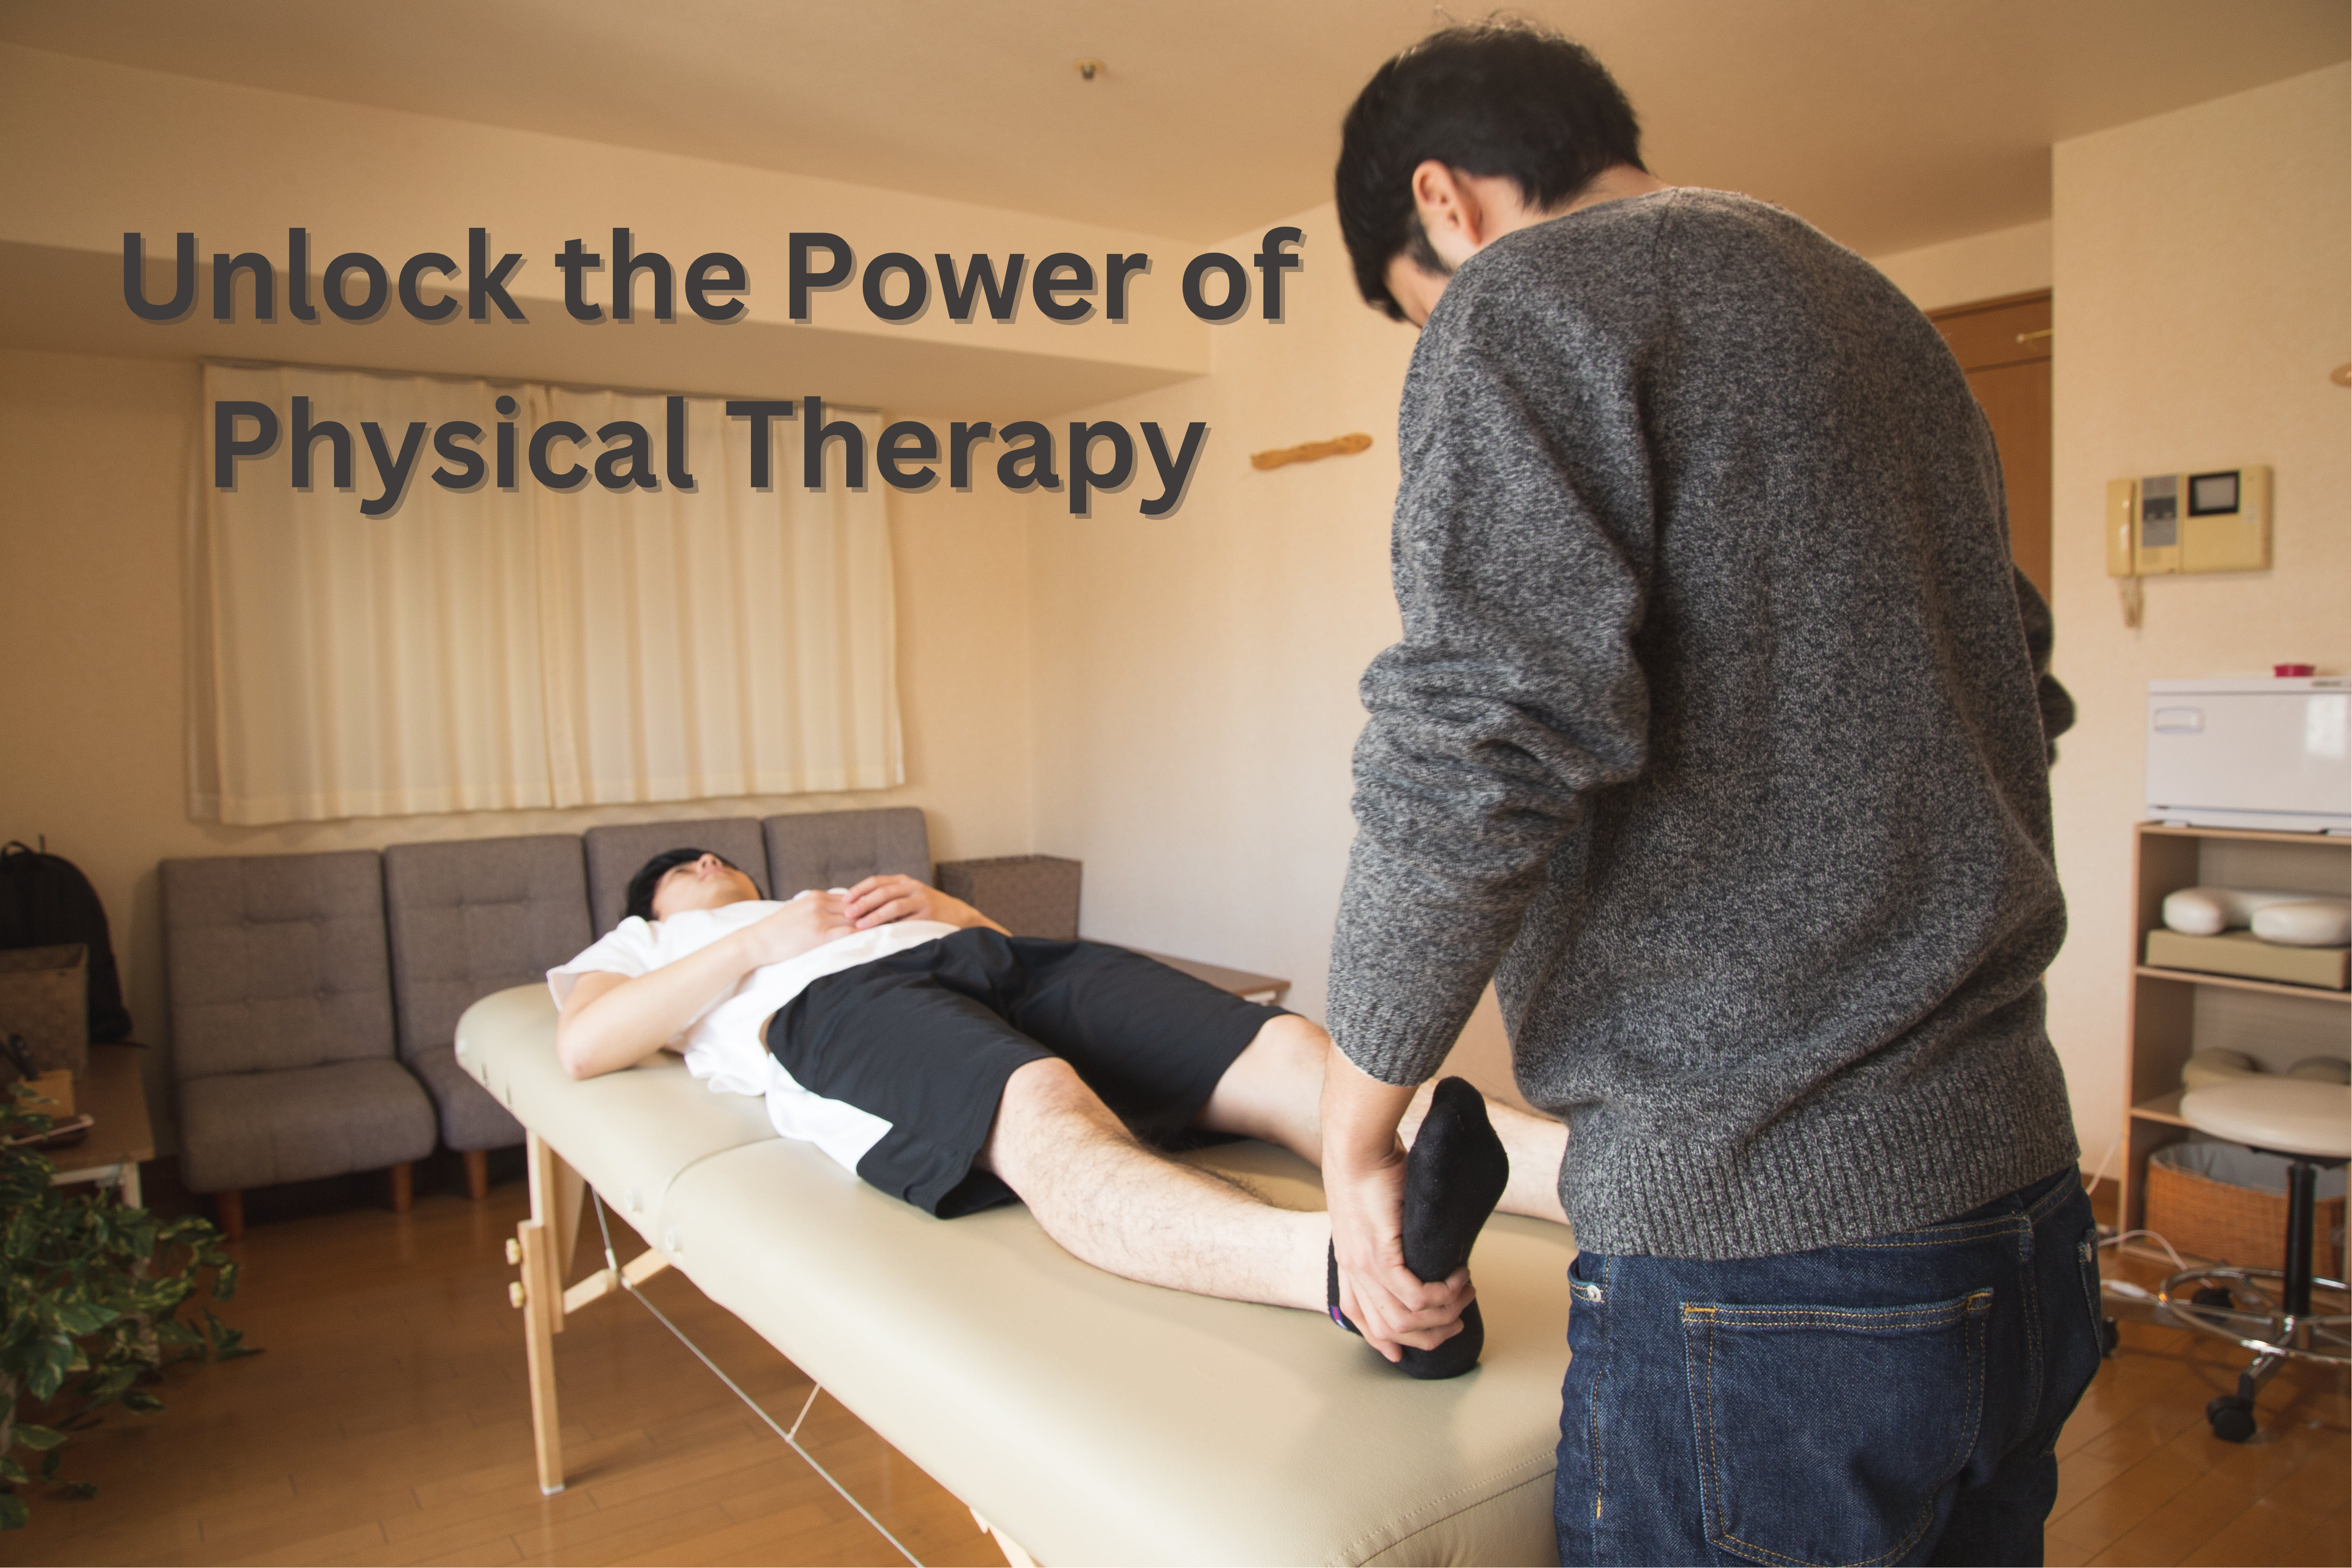 Unlock the Power of Physical Therapy